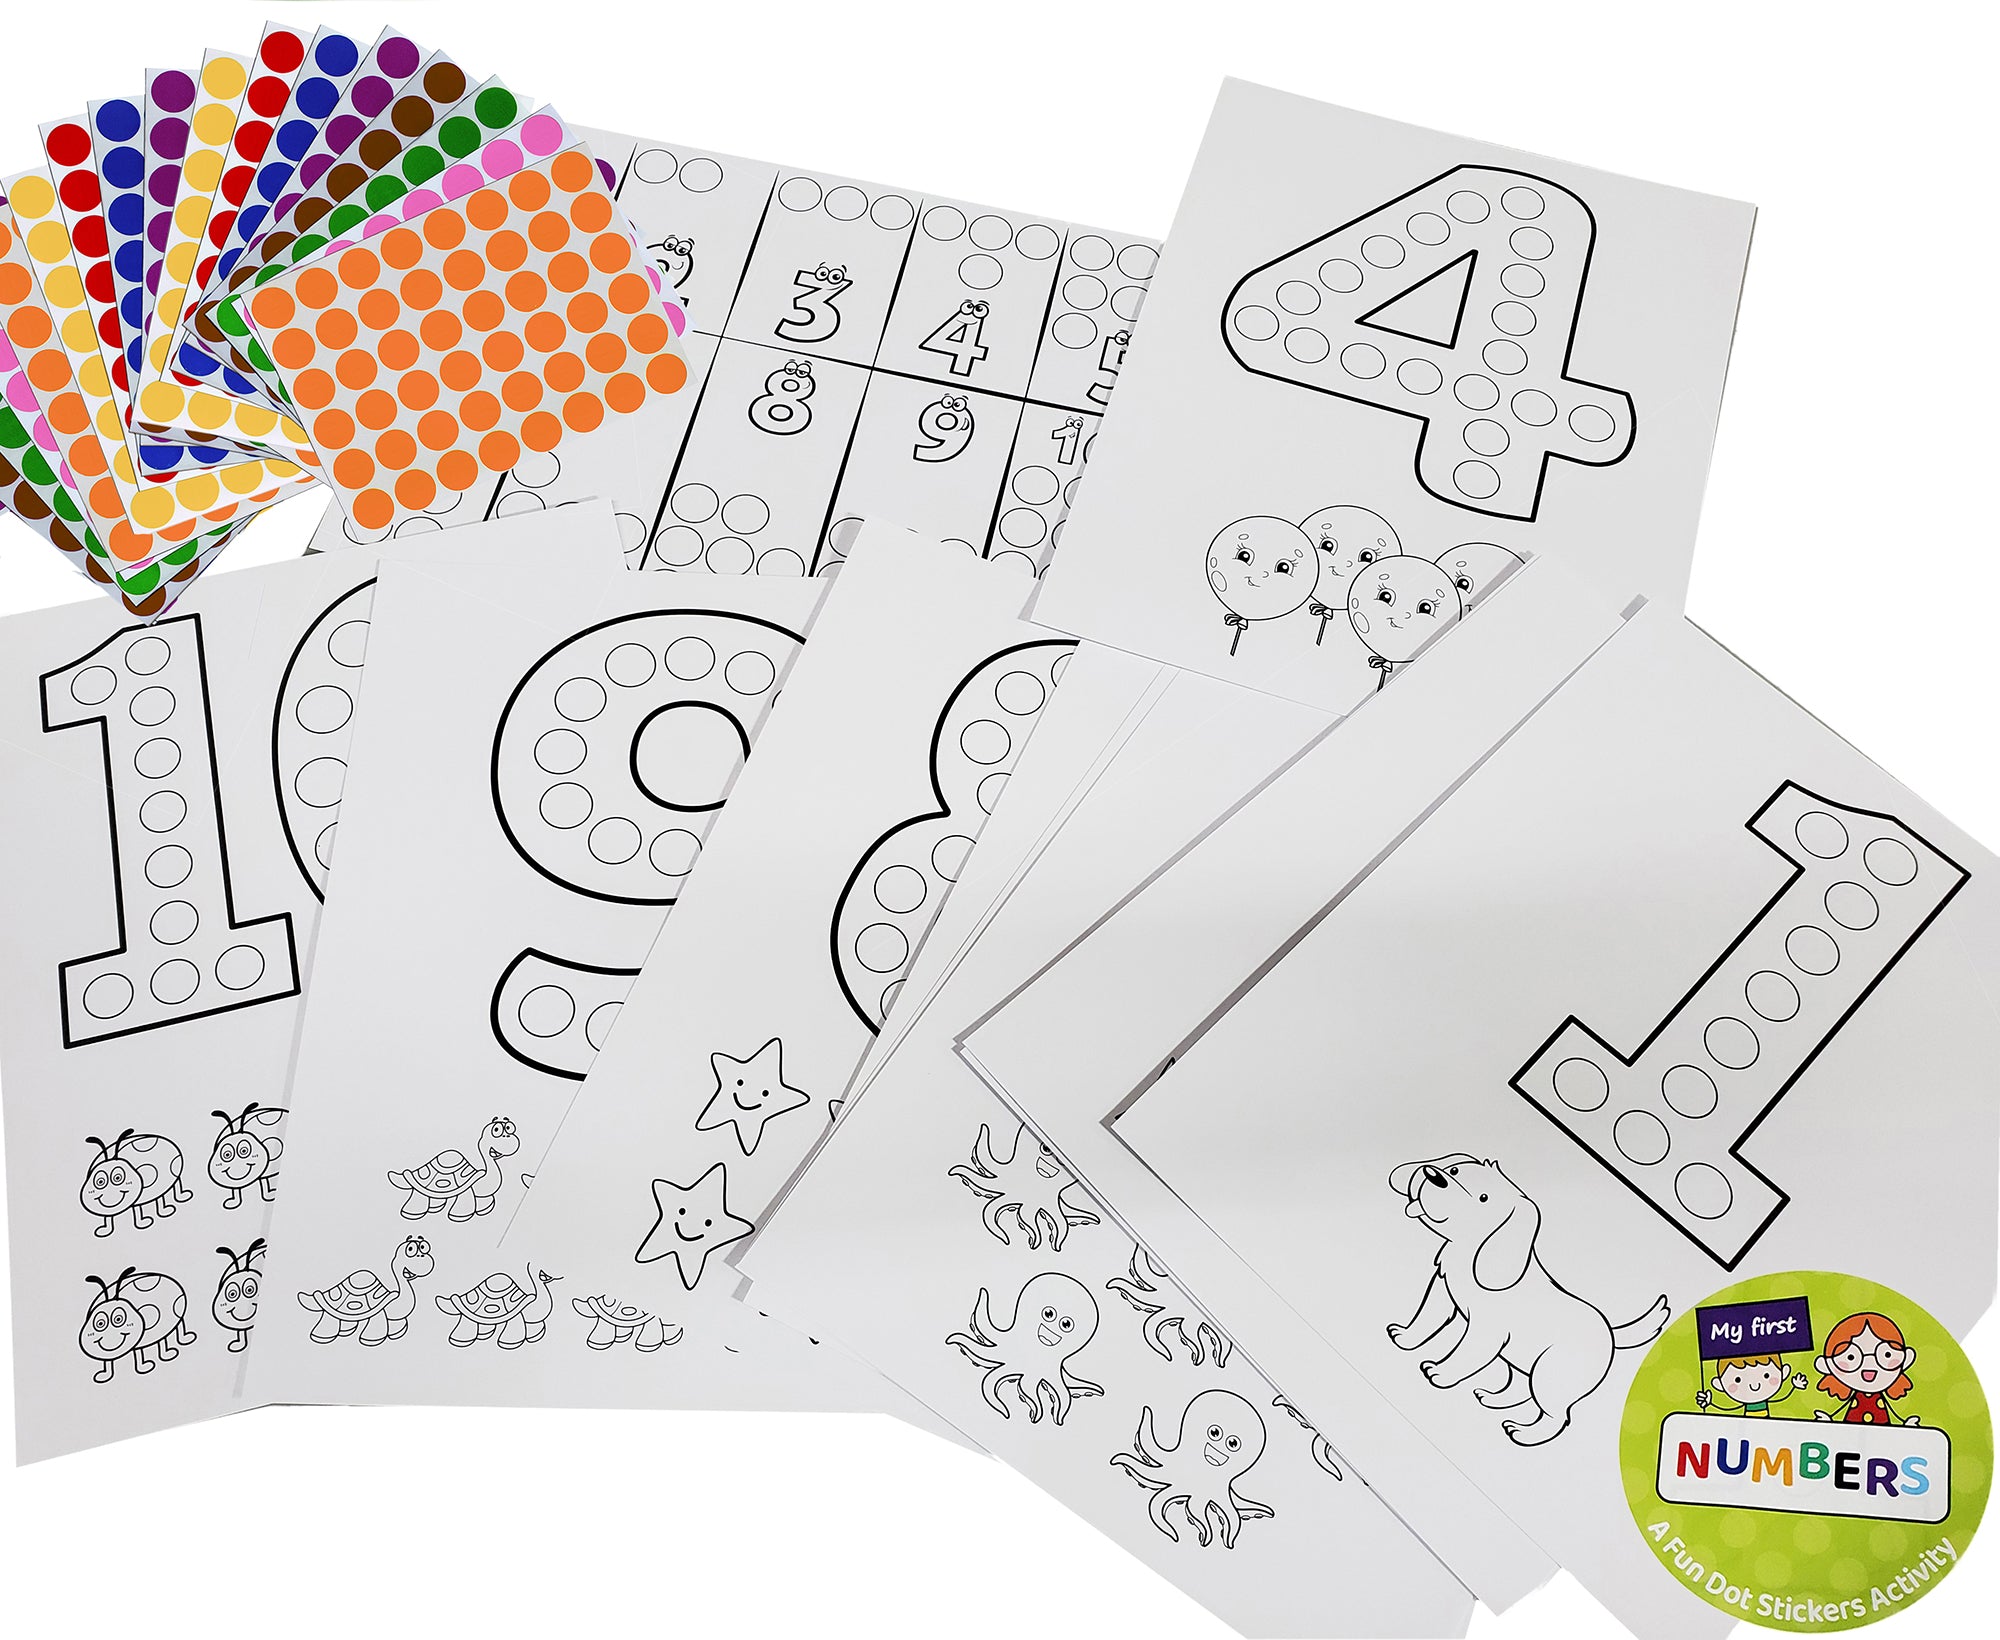 Royal Green Fun Dot Sticker Activity Sheets for Kids, My First Numbers (1-10), Creative Learning for Ages